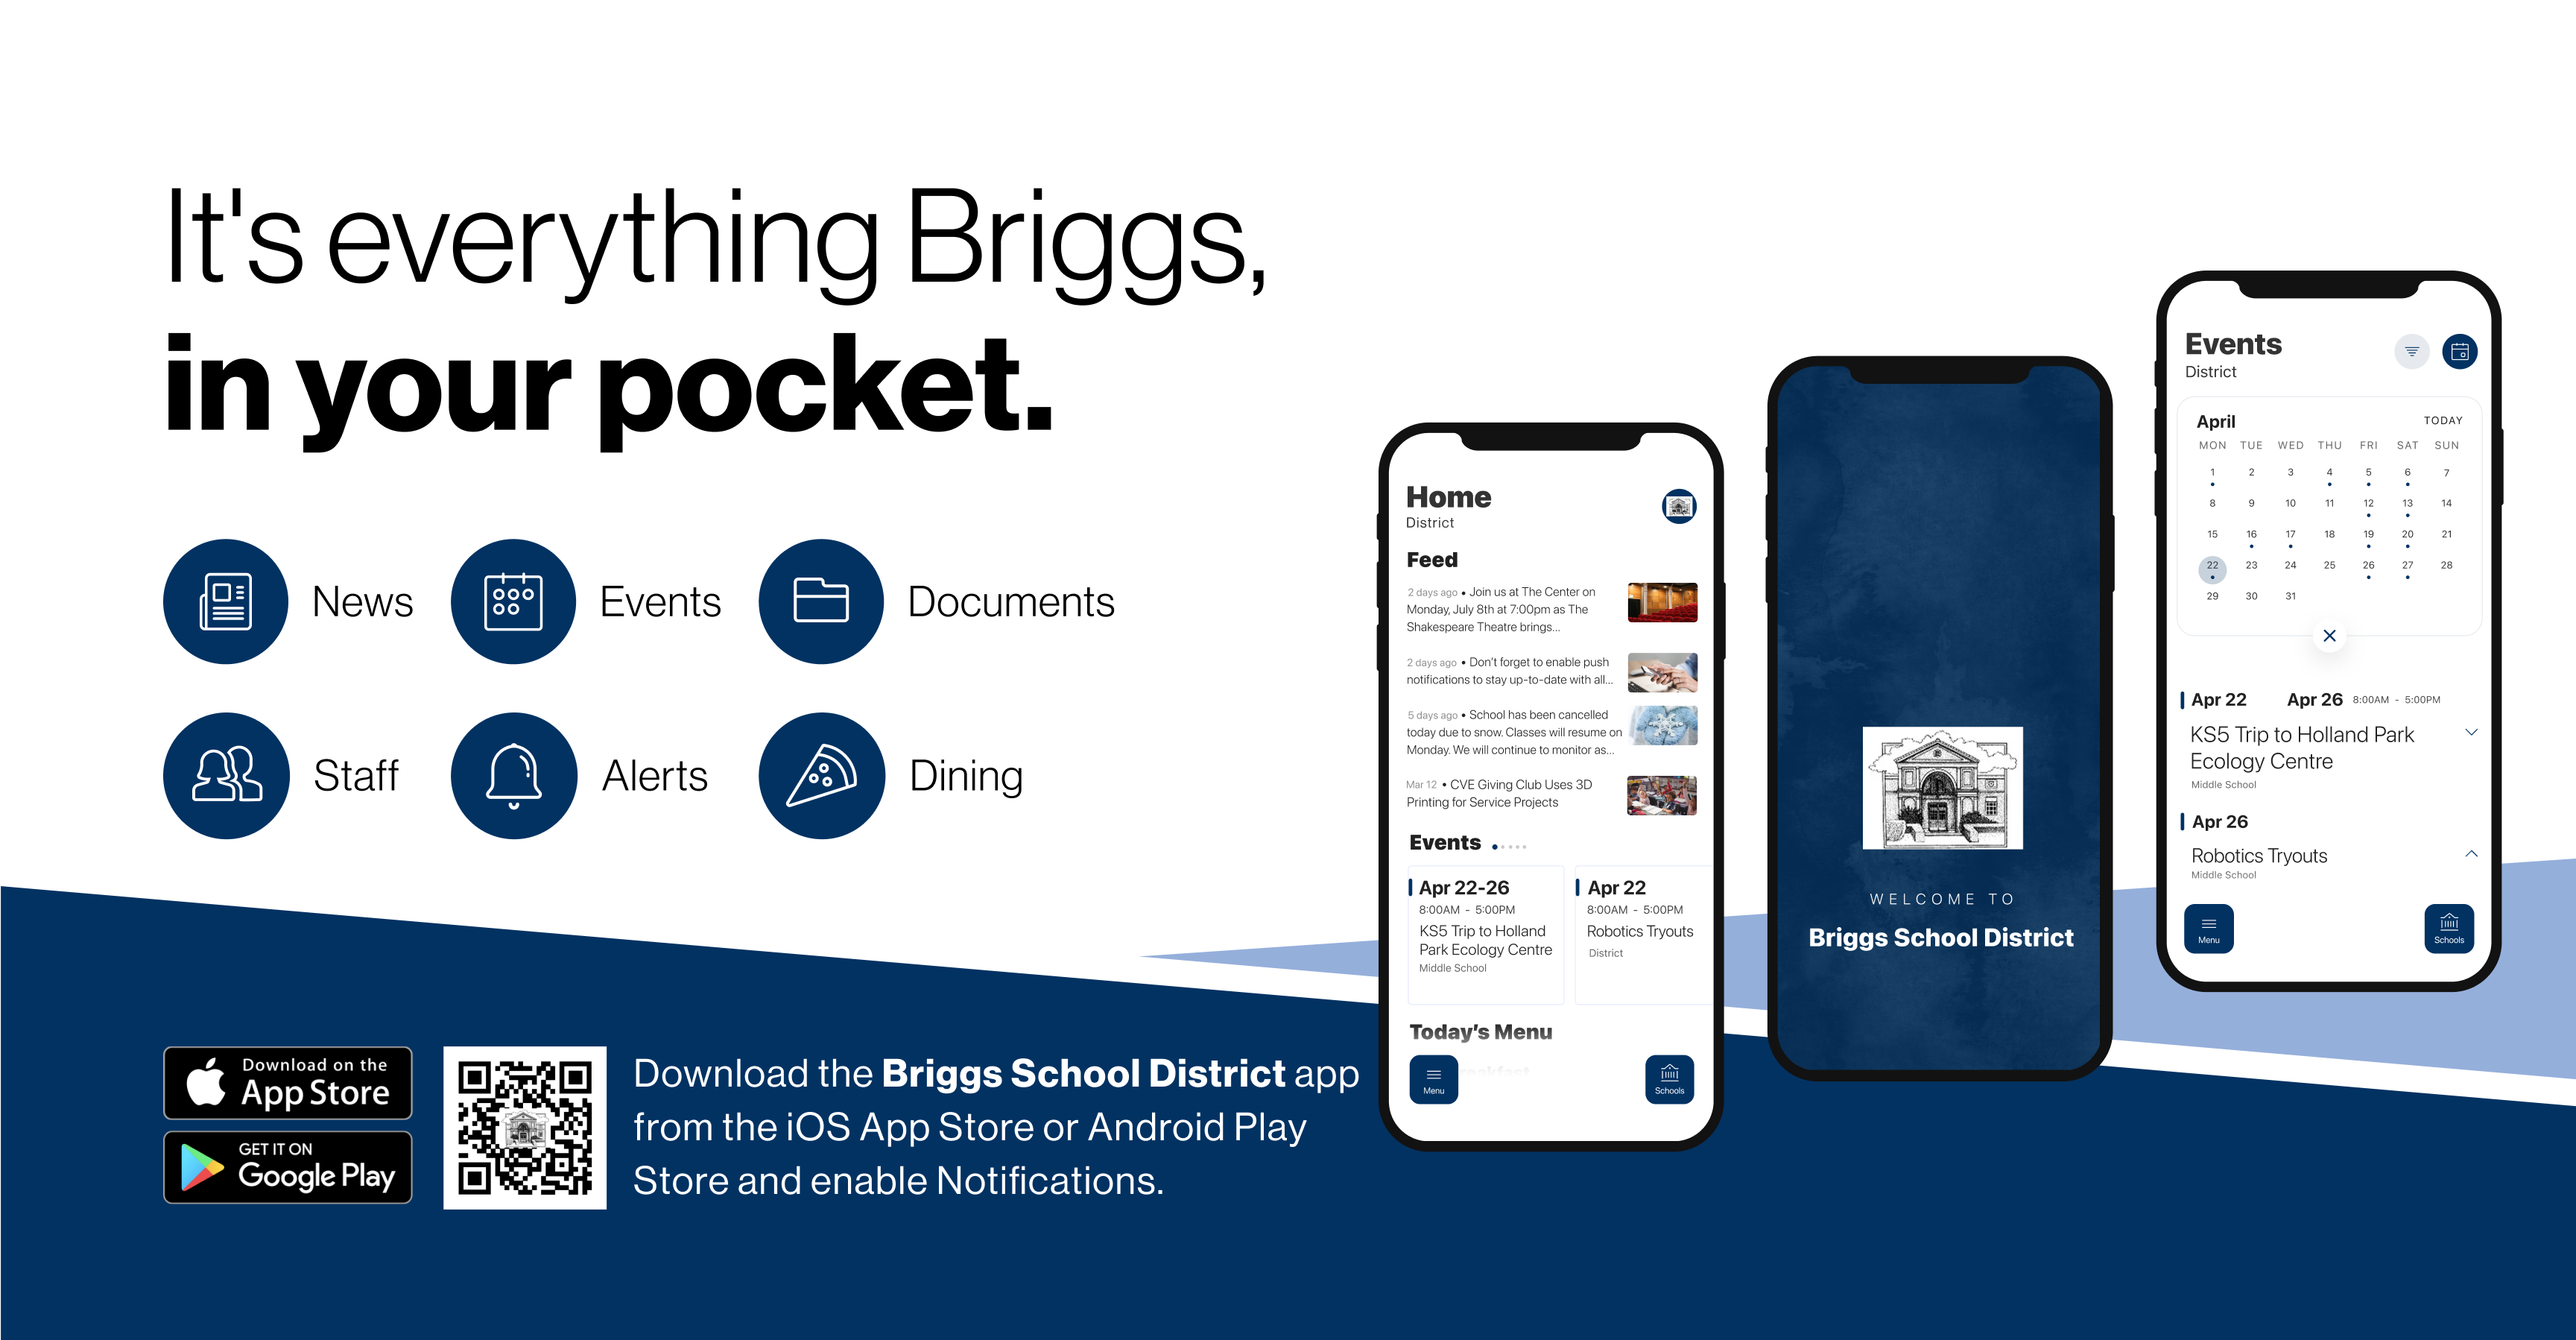 ITS EVERYTHING briggs in your pocket